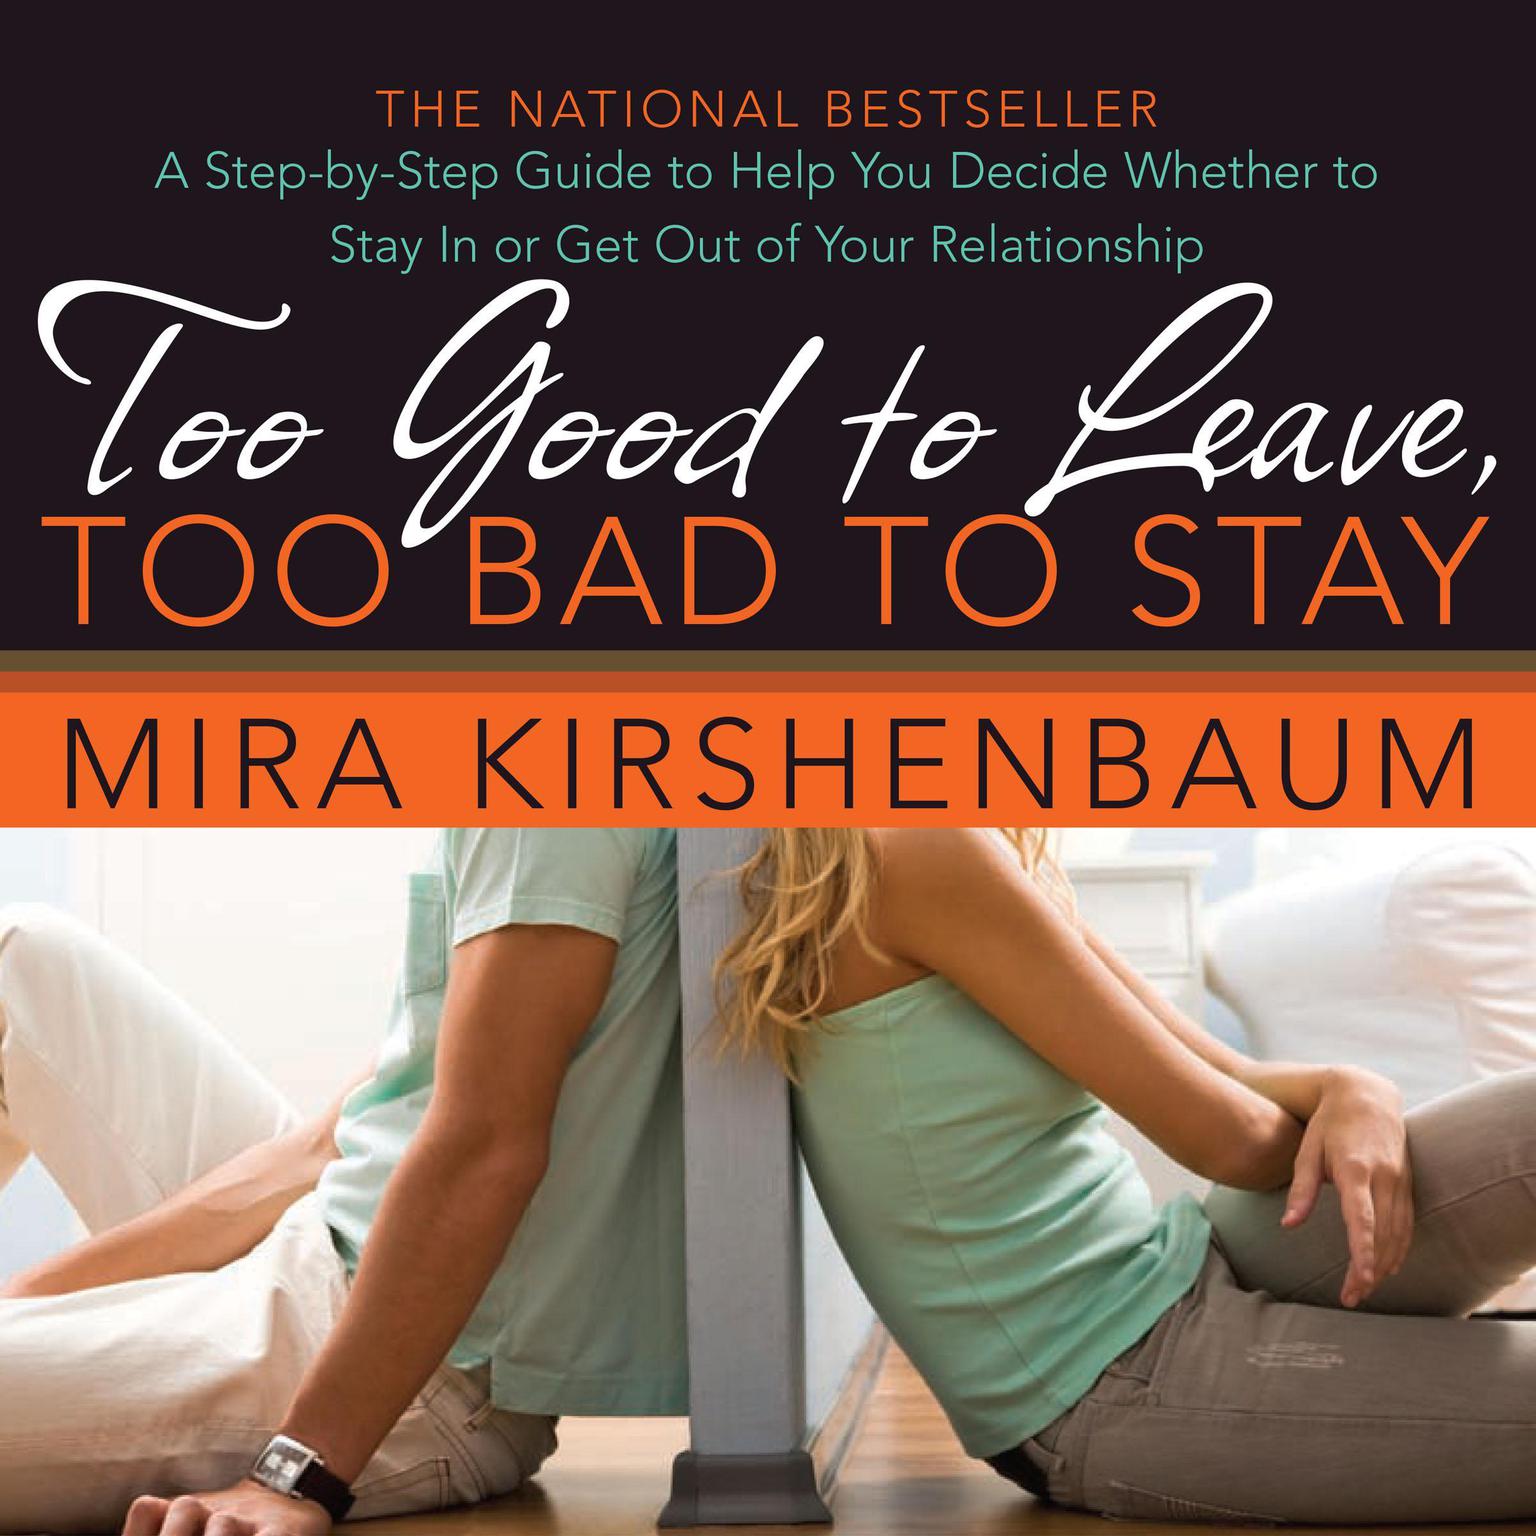 Too Good to Leave, Too Bad to Stay: A Step-by-Step Guide to Help You Decide Whether to Stay In or Get Out of Your Relationship Audiobook, by Mira Kirshenbaum